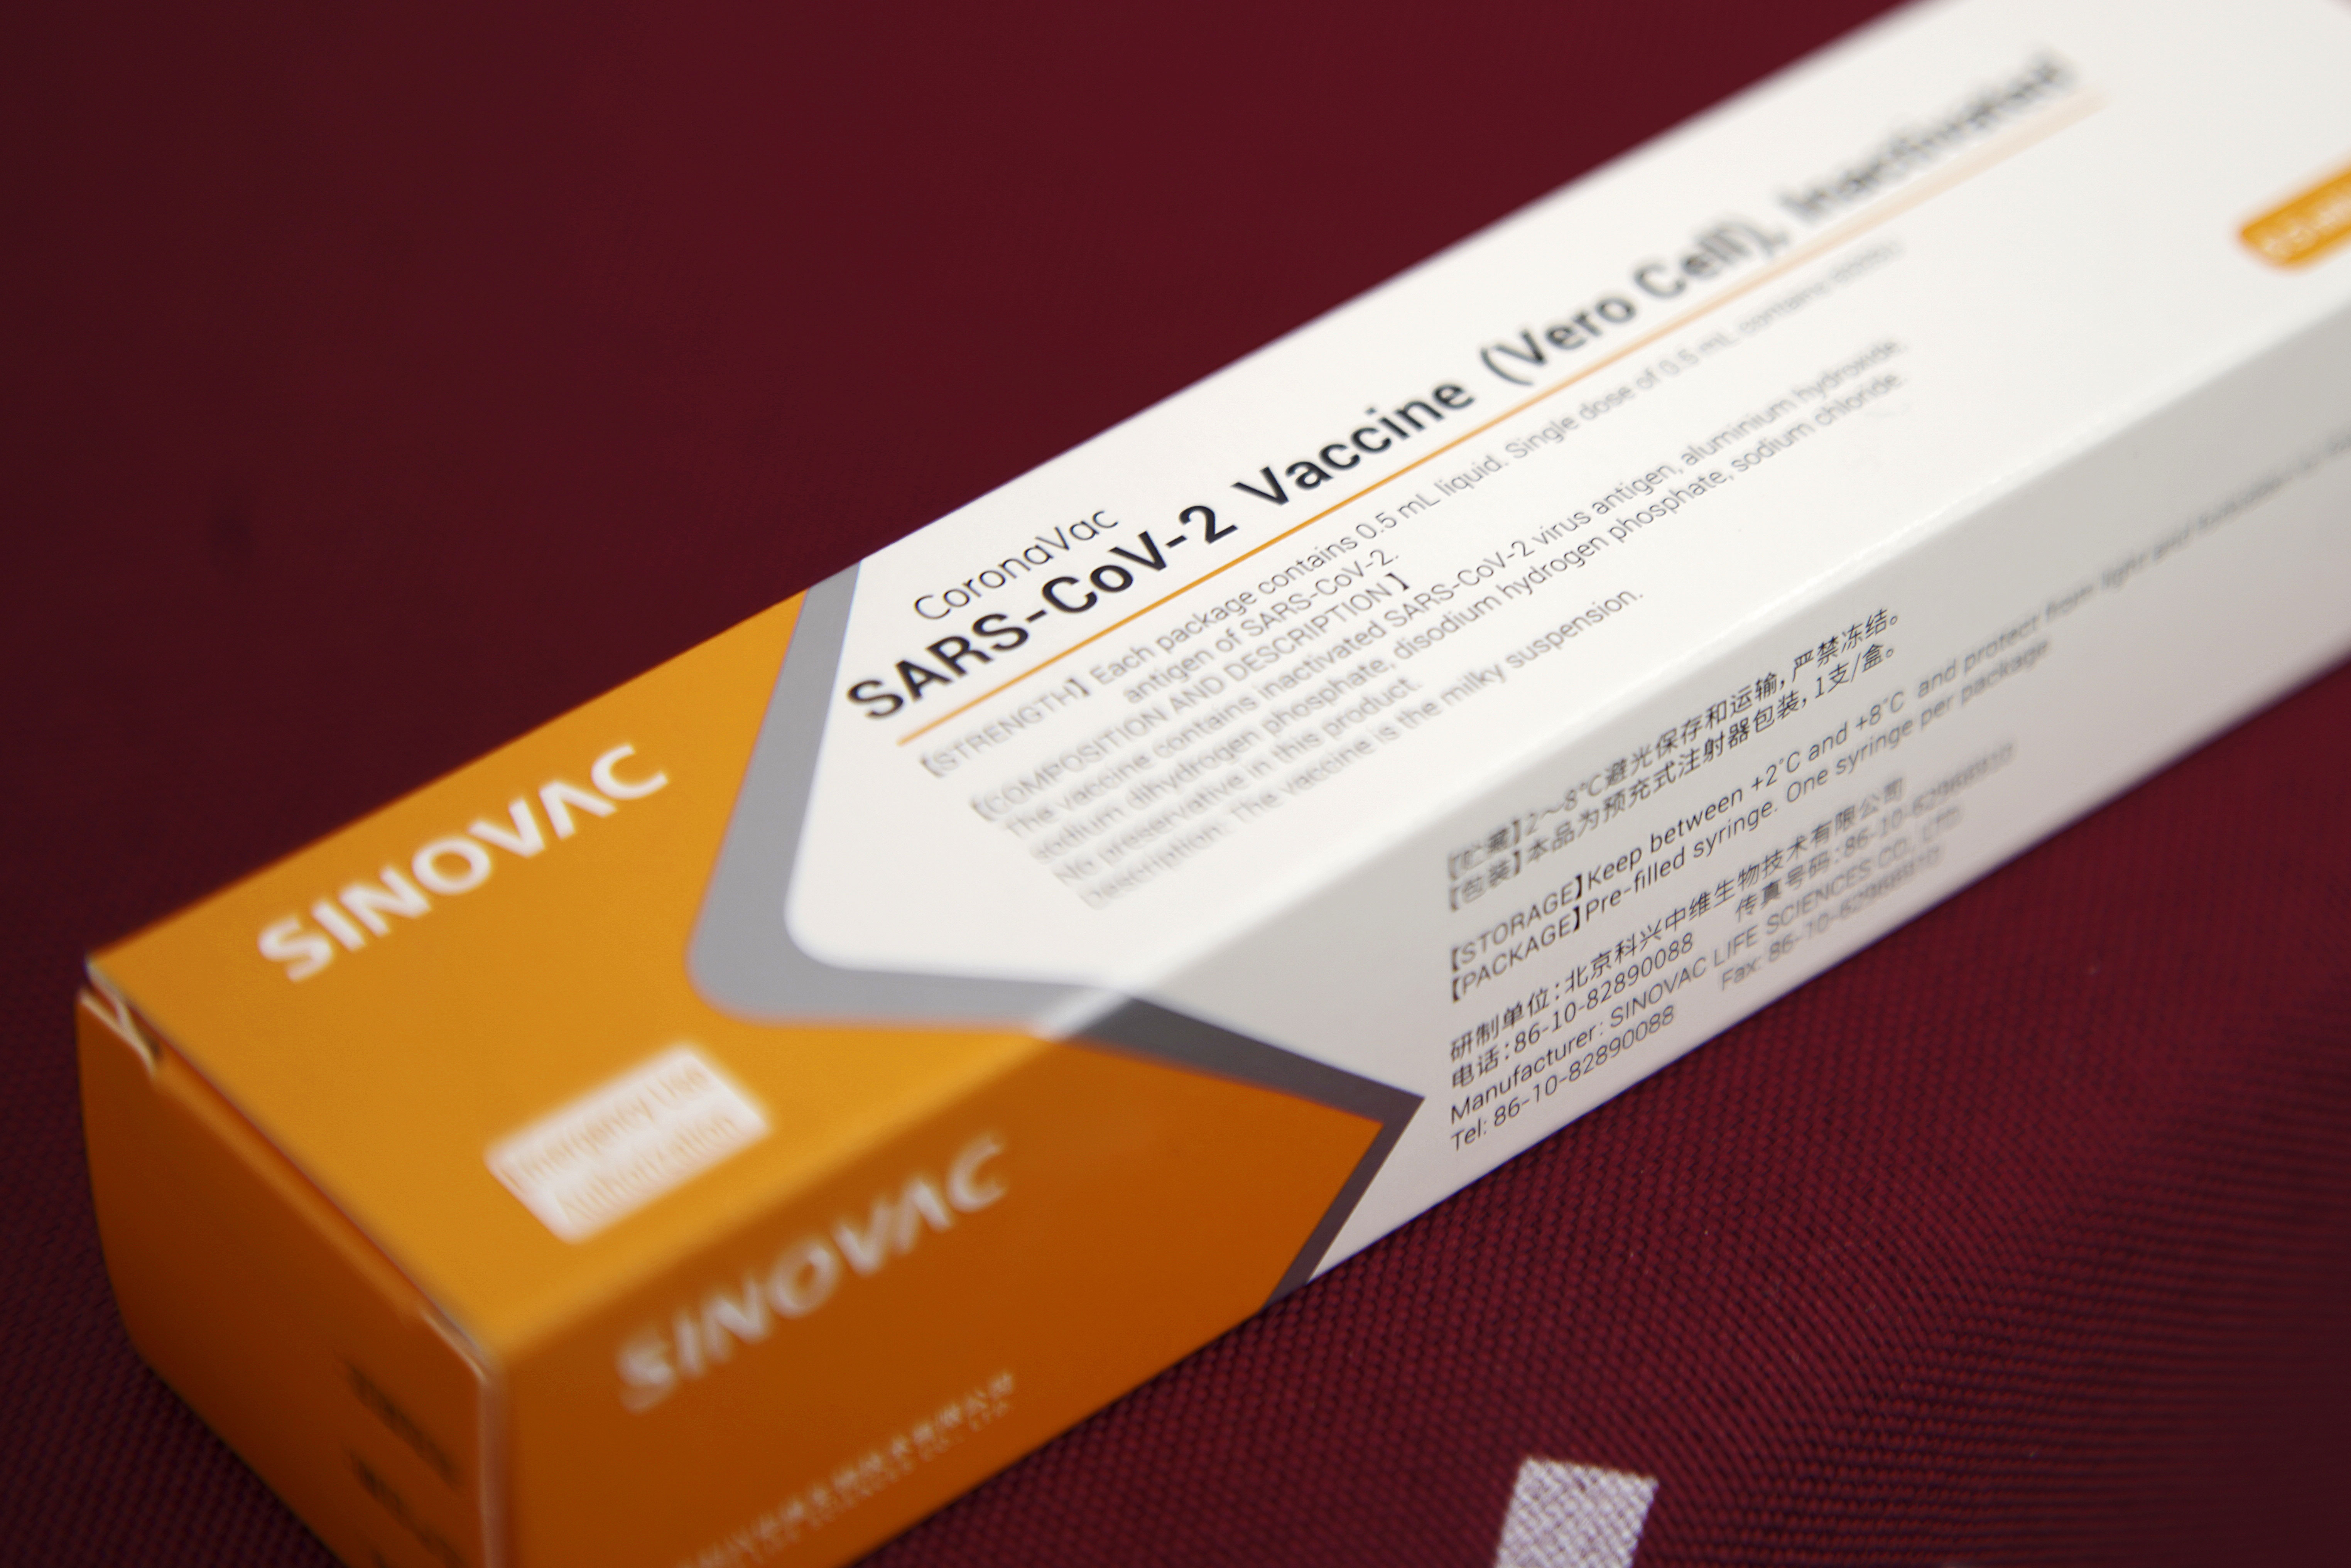 A box of Sinovac's Covid-19 vaccine is displayed at a media event in Beijing in September 2020.